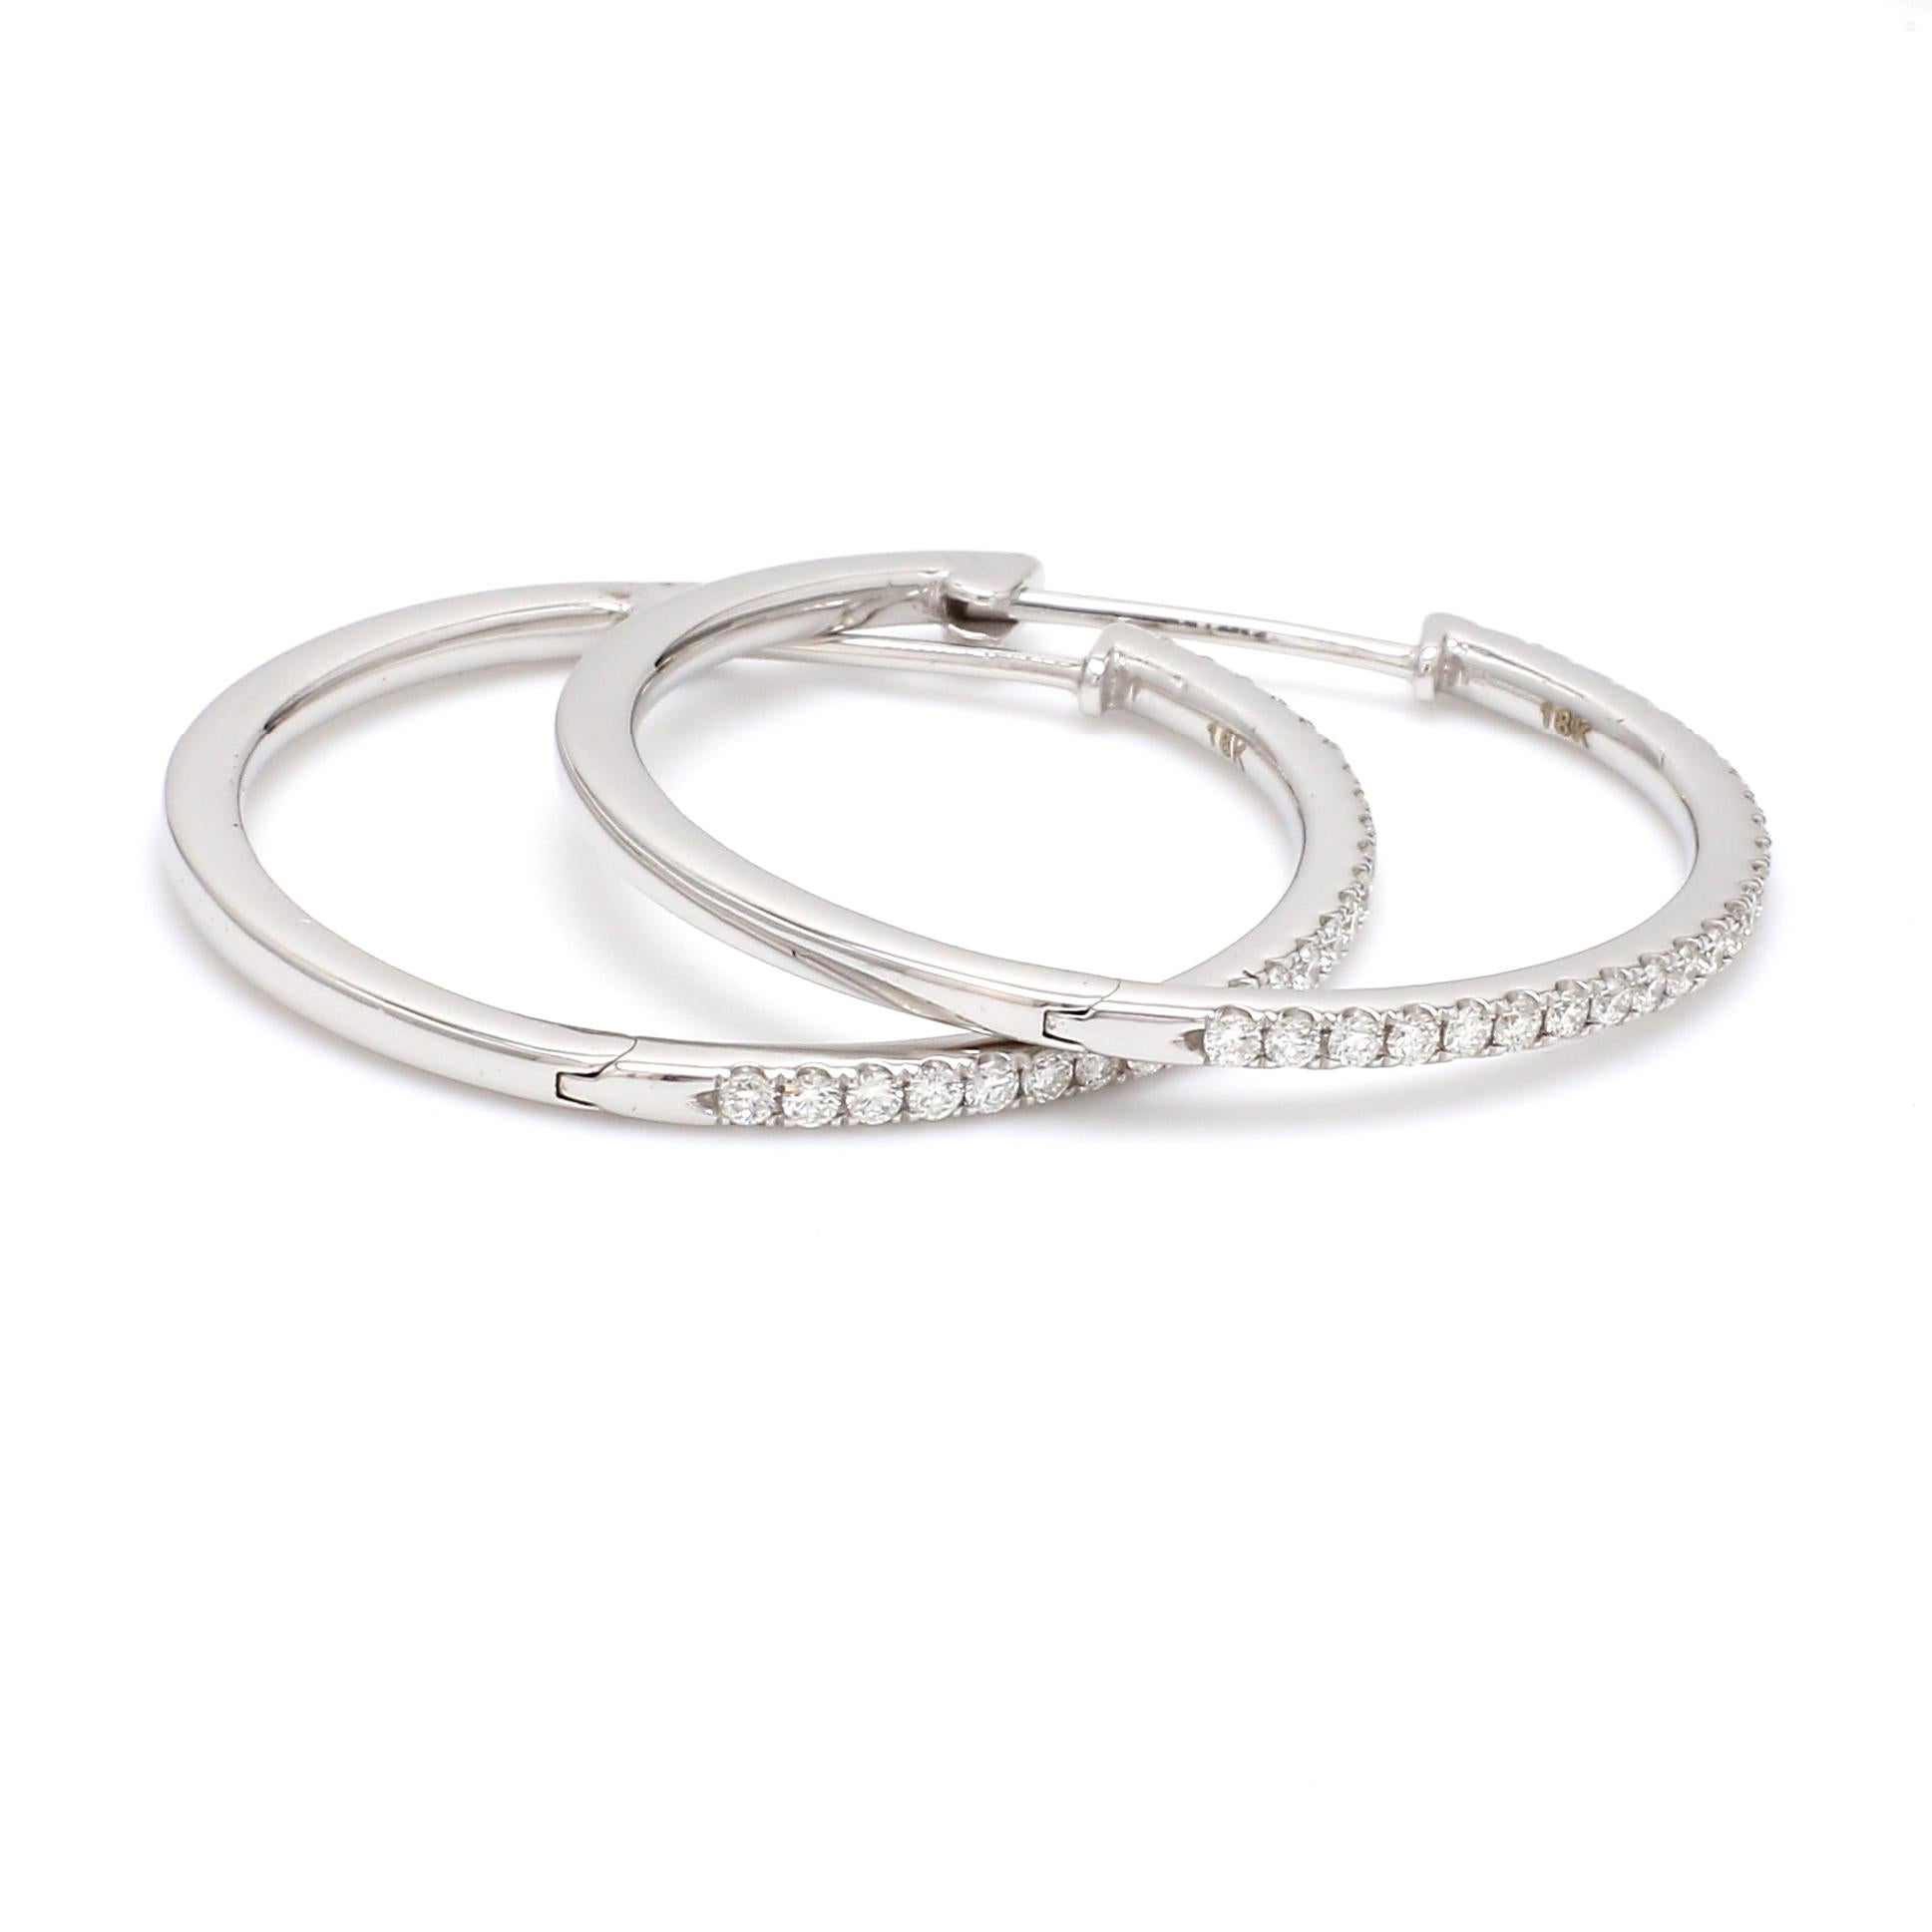 A Beautiful Handcrafted Hoop Earring in 18 karat White Gold with Natural Brilliant Cut Colorless Diamond . A Statement piece for Evening Wear

Natural Diamond Details
Pieces : 50 Pieces
Weight : 0.55 Carat 
Clarity of Diamond : VS
Colour of Diamond